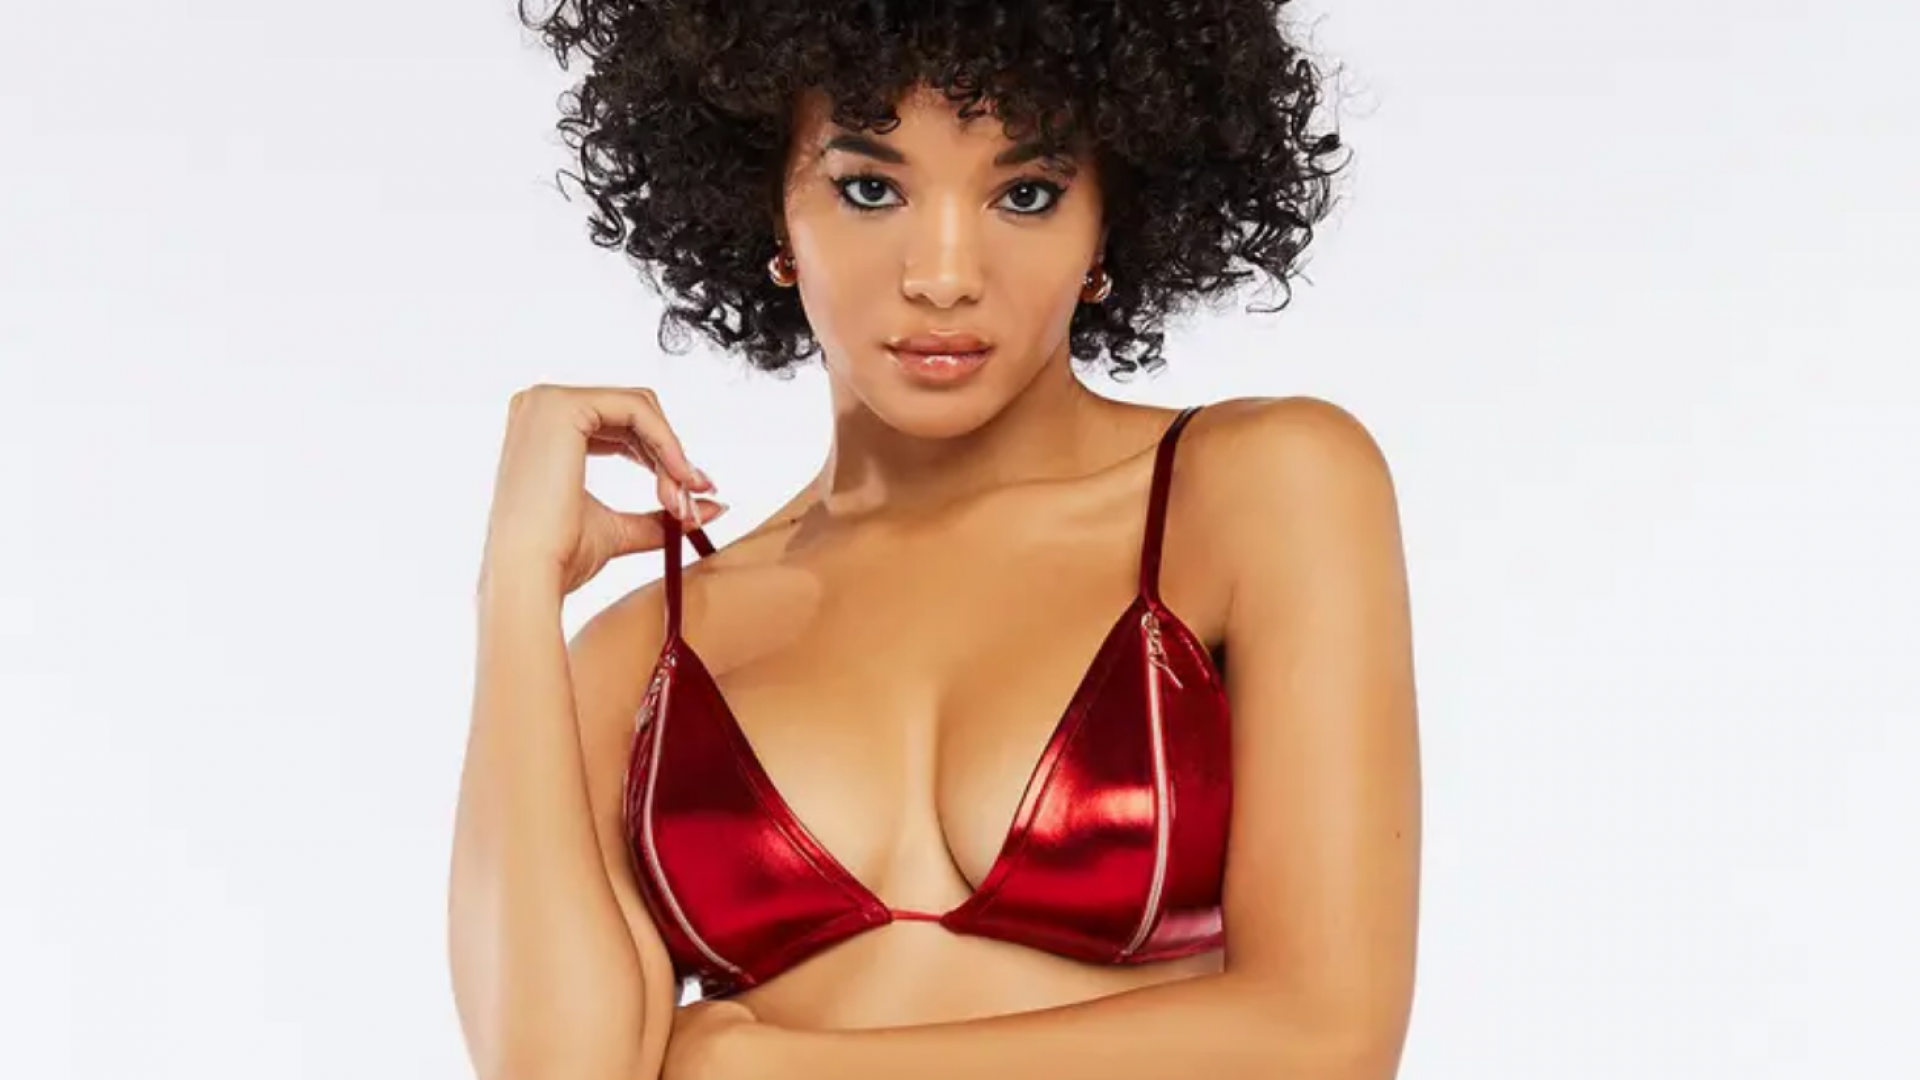 8 Red Lingerie Sets To Look Your Sexiest On Valentine's Day